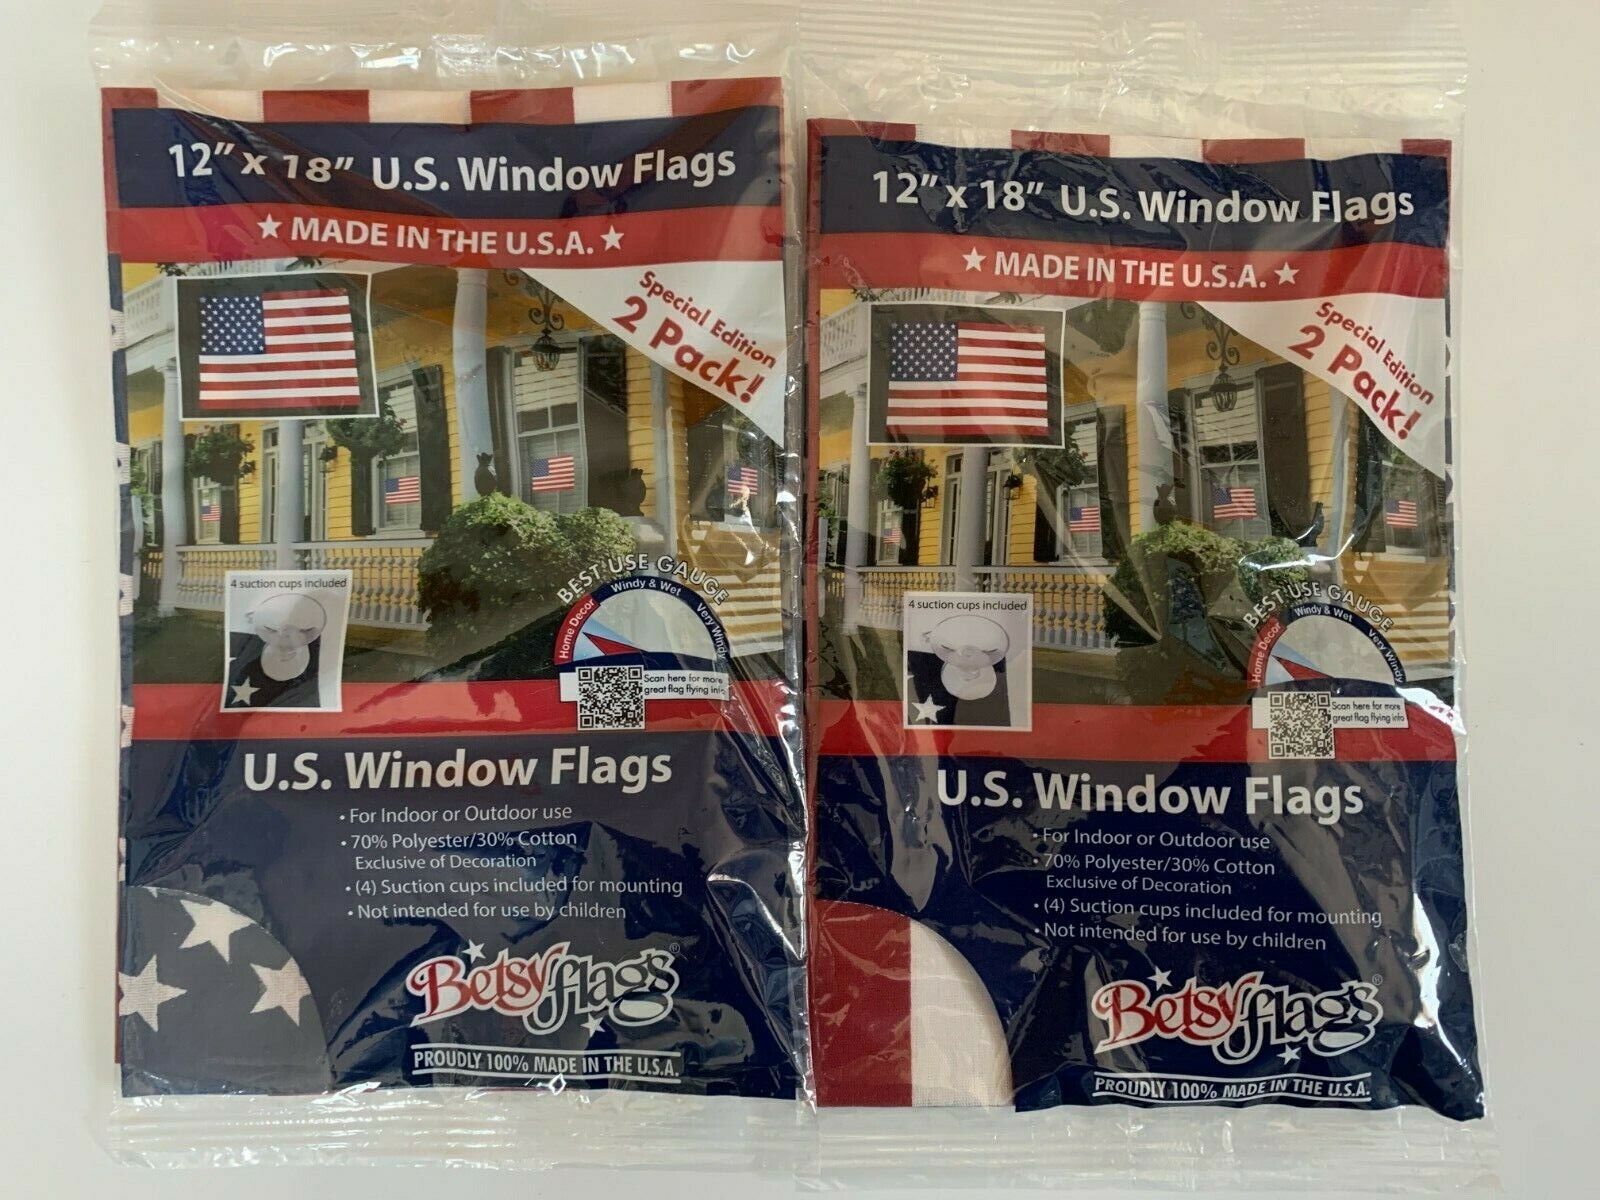 USA Window Flags 2 PK by Betsy Flags - Brand New 12